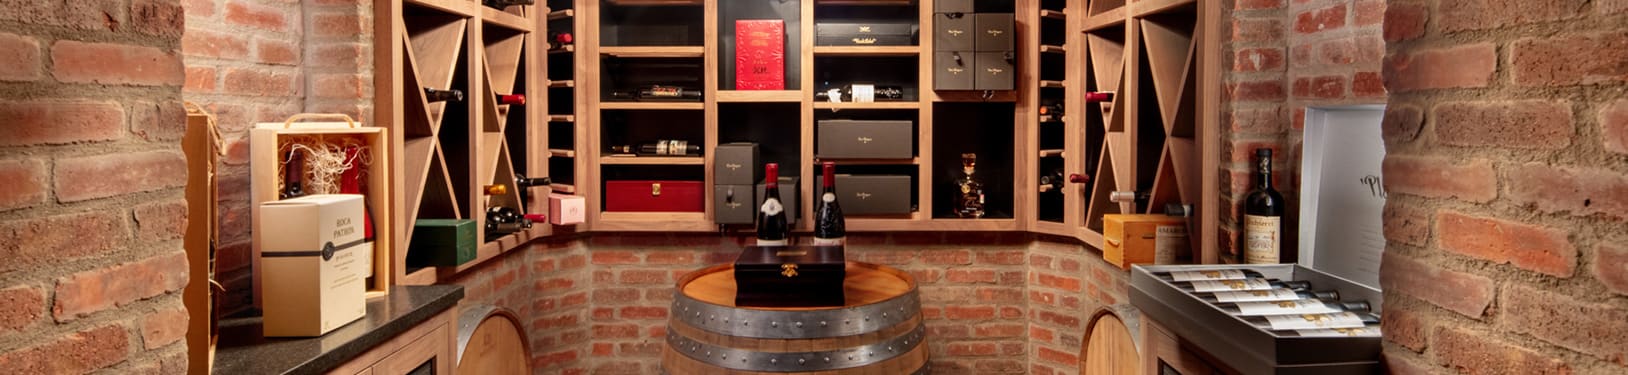 Wine cellar with exposed brick walls, custom wine shelves, and barrels